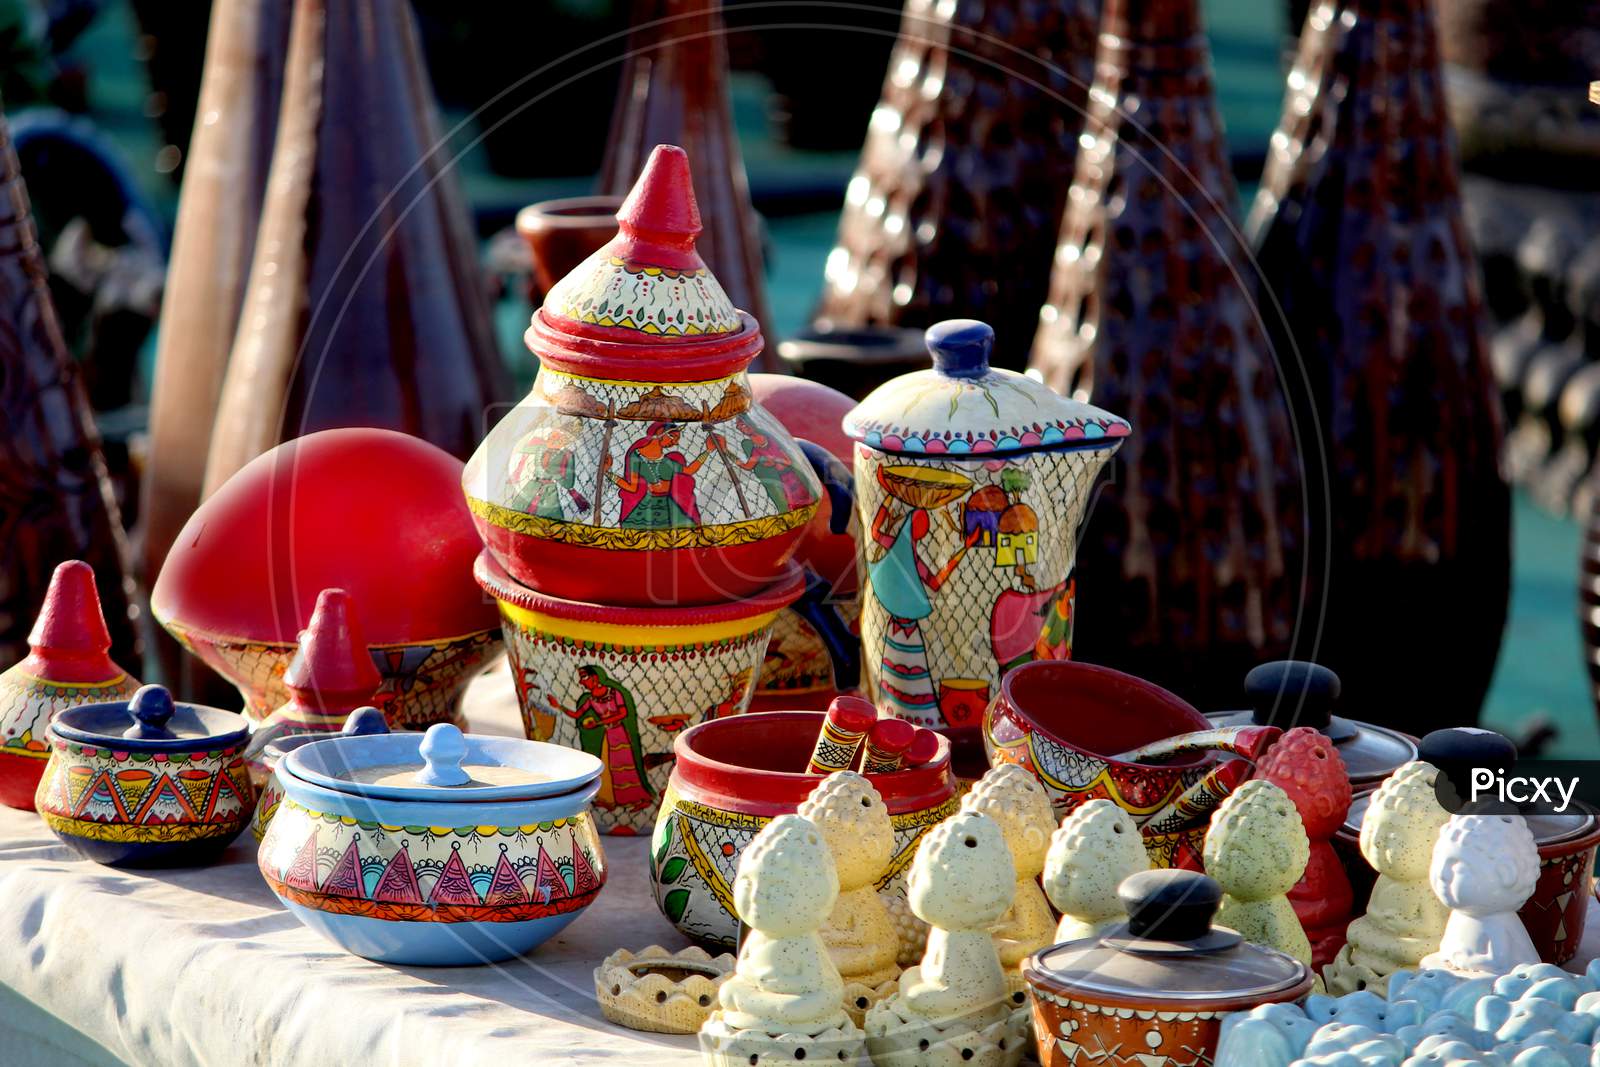 Home Decorative With Ceramics Or Earthenware At a Vendor Stall